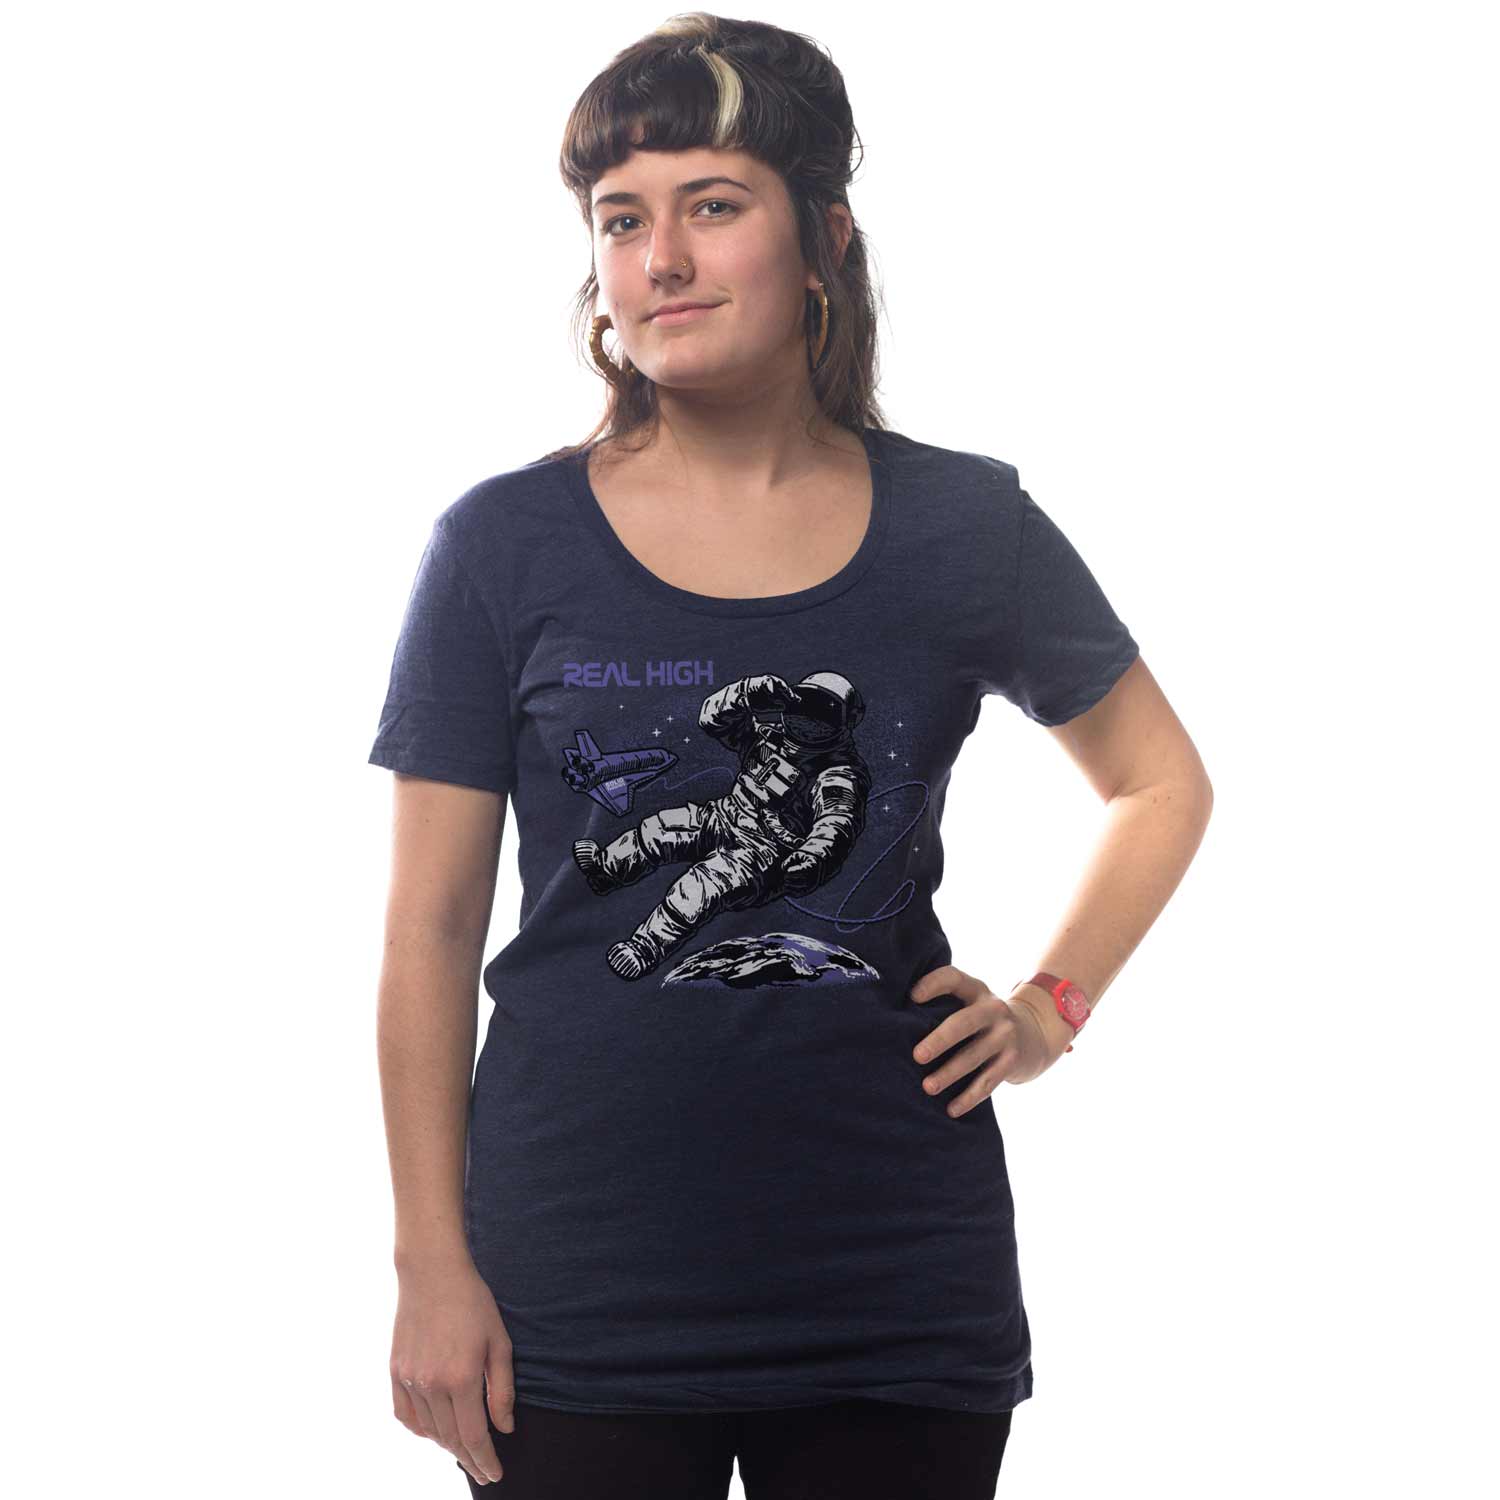 Women's Real High Vintage Astronaut Graphic T-Shirt | Funny Marijuana Tee on Model | Solid Threads